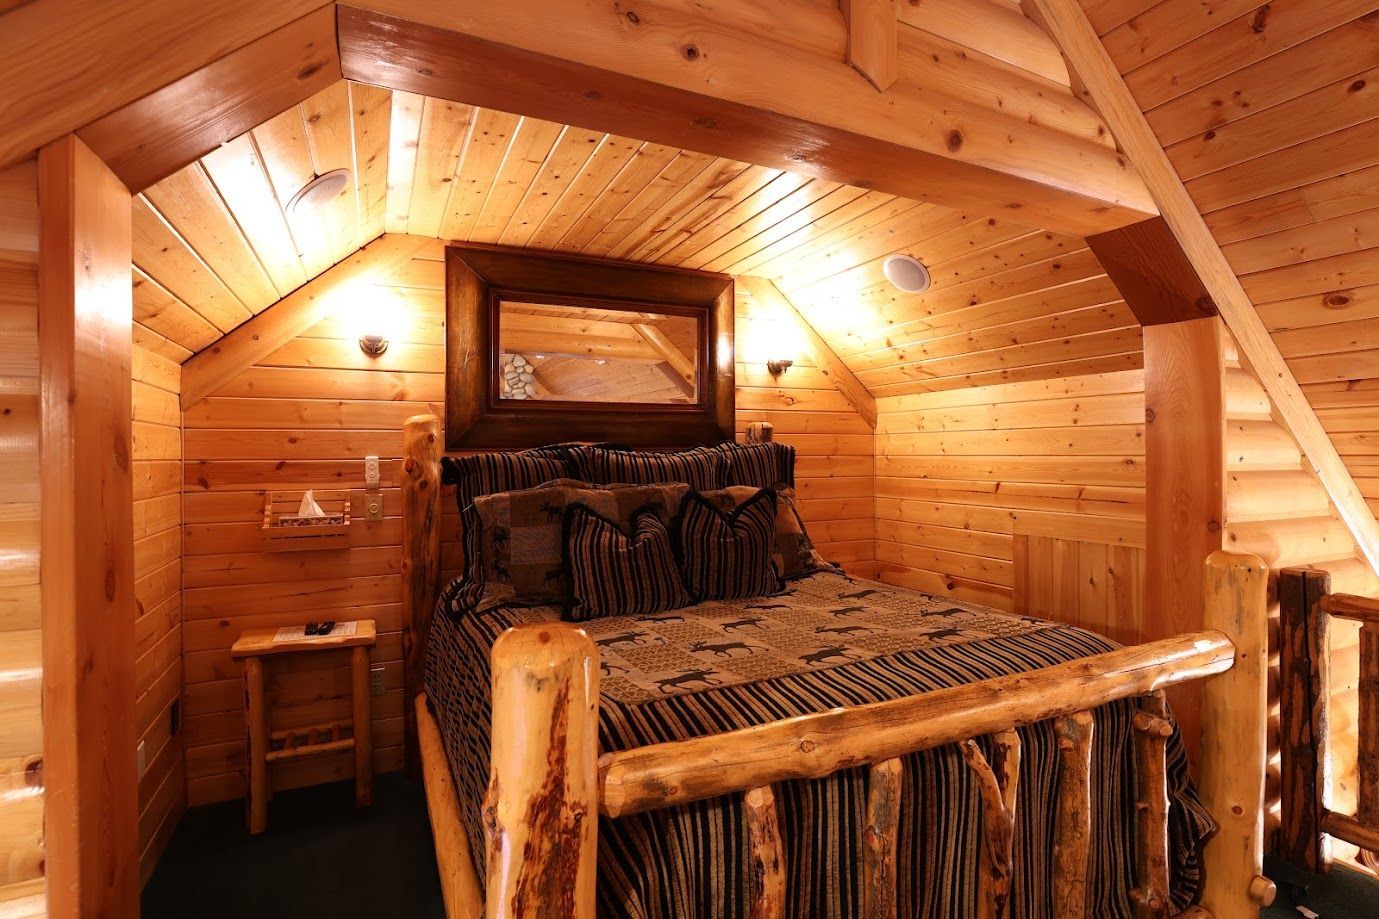 There is a bed in the attic of a log cabin.